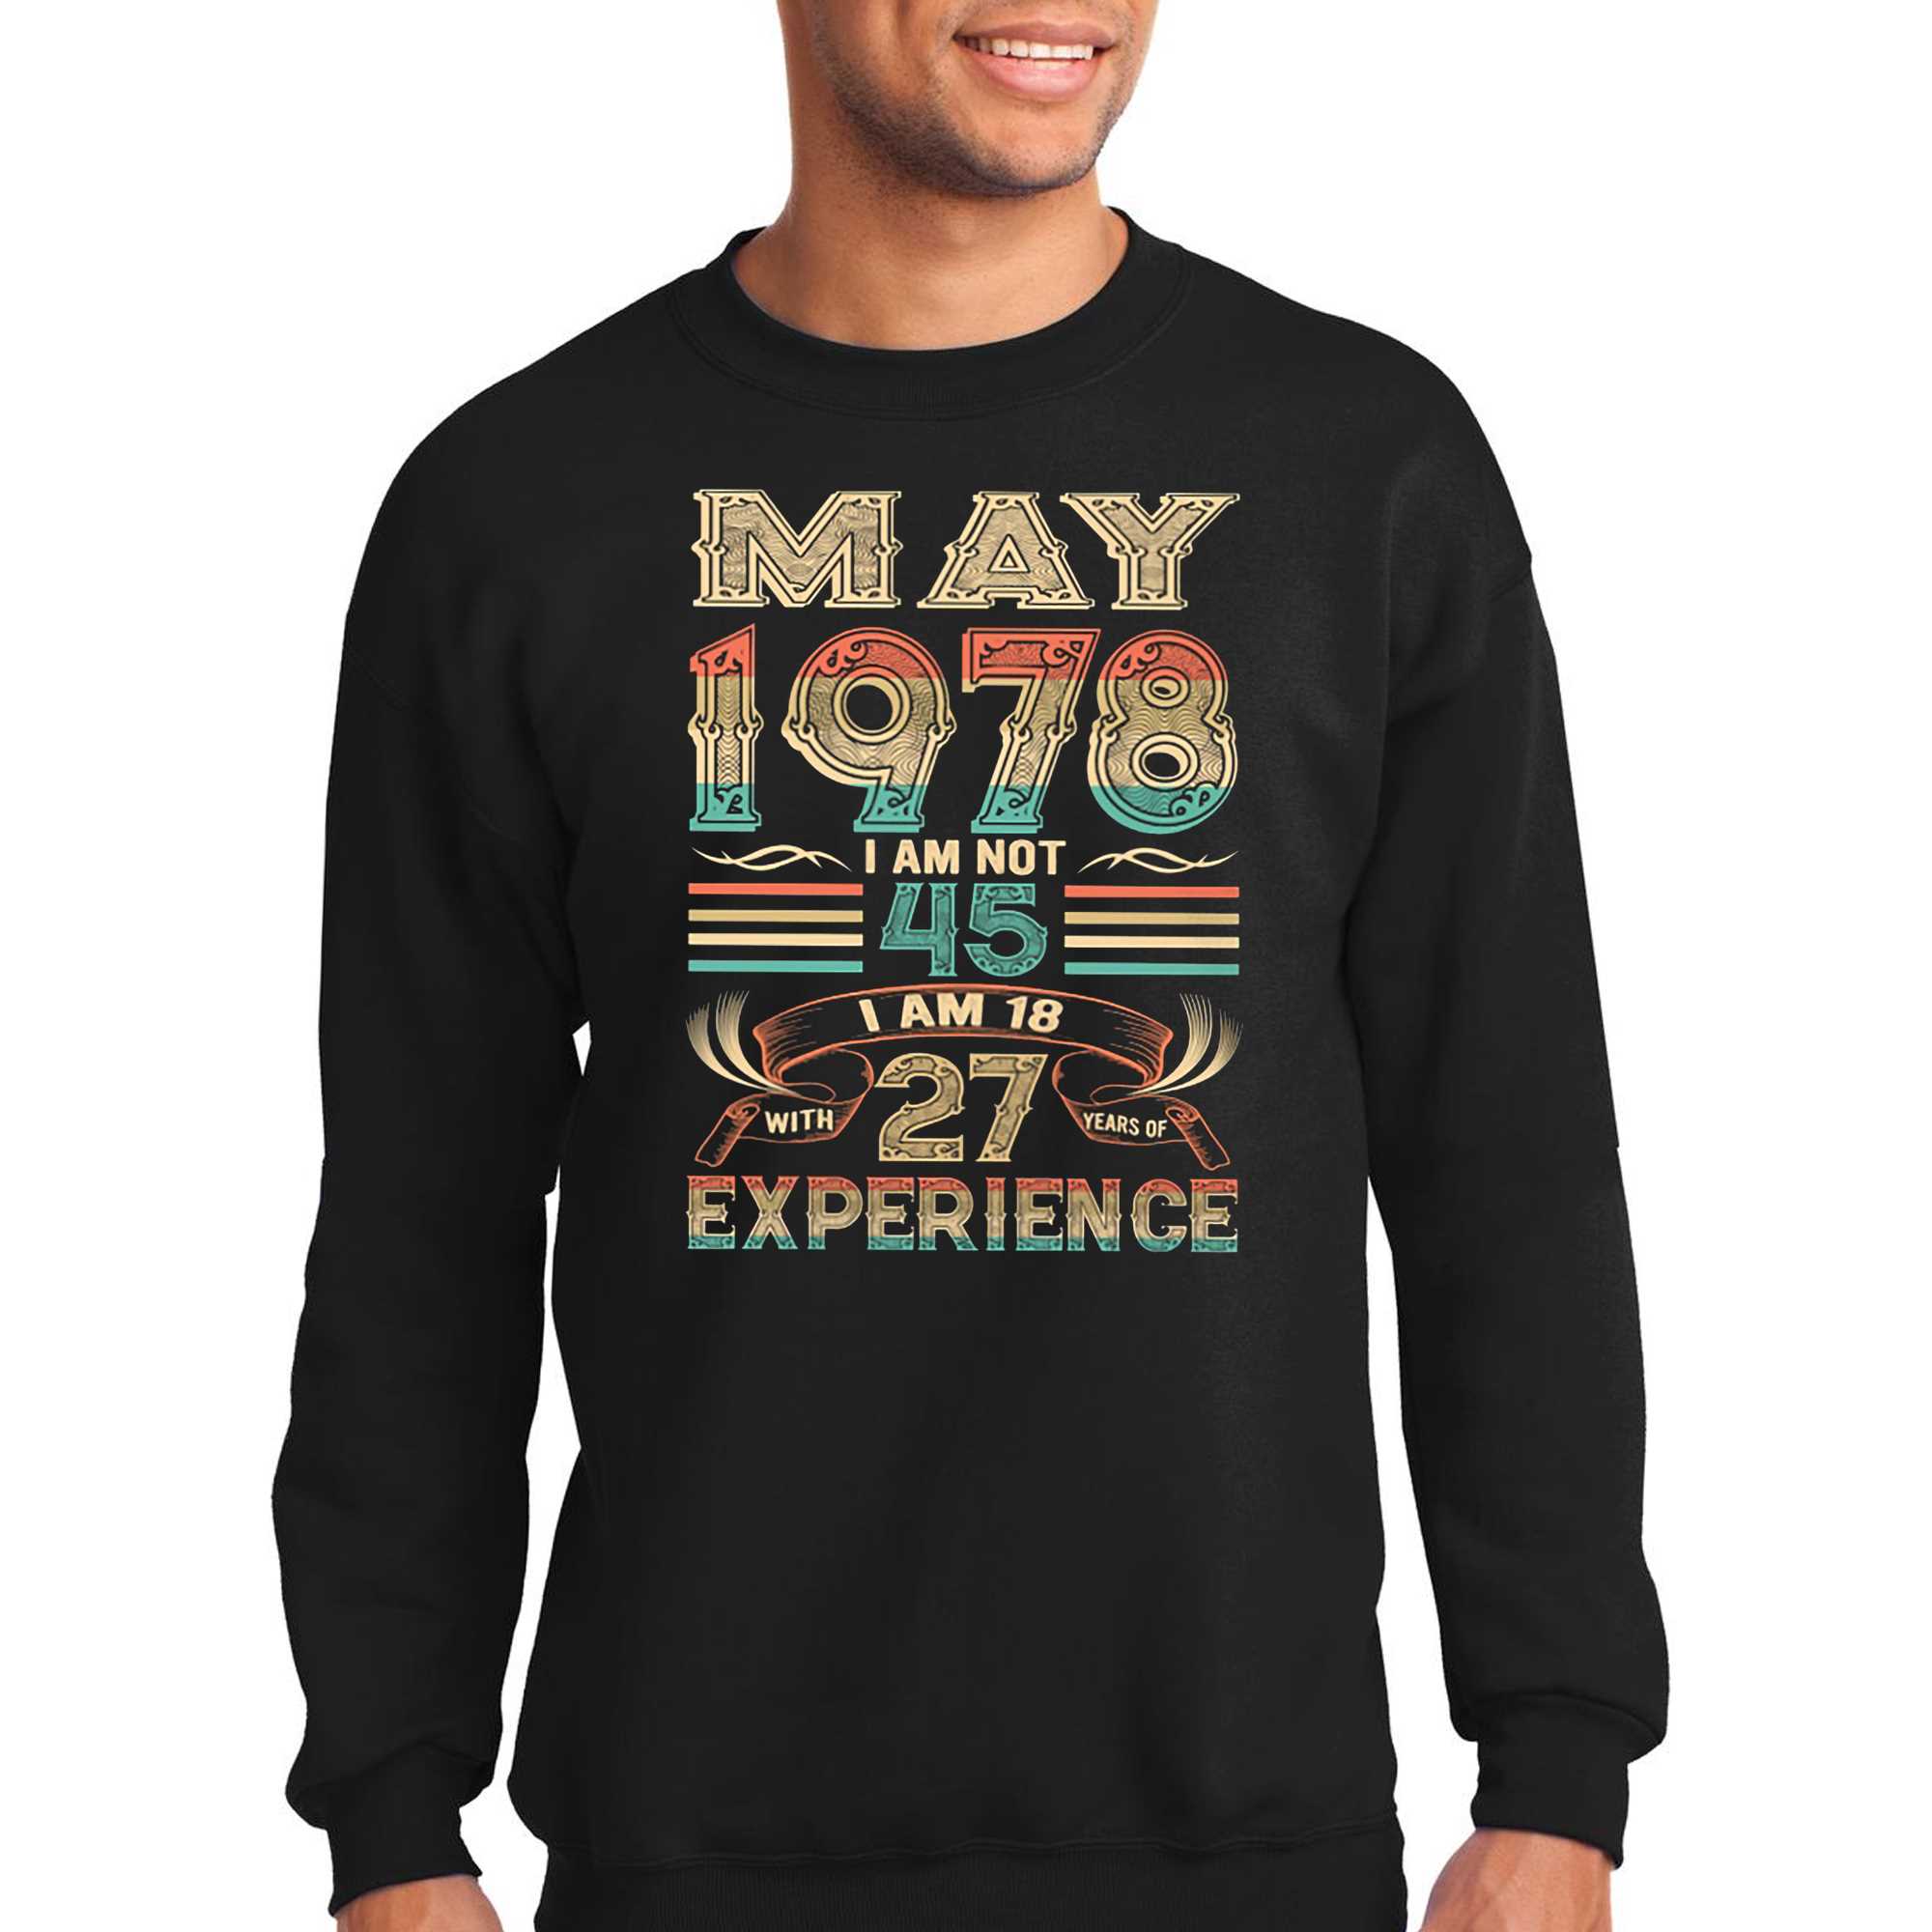 May 1978 I Am Not 45 I Am 18 With 27 Years Of Experience Shirt 